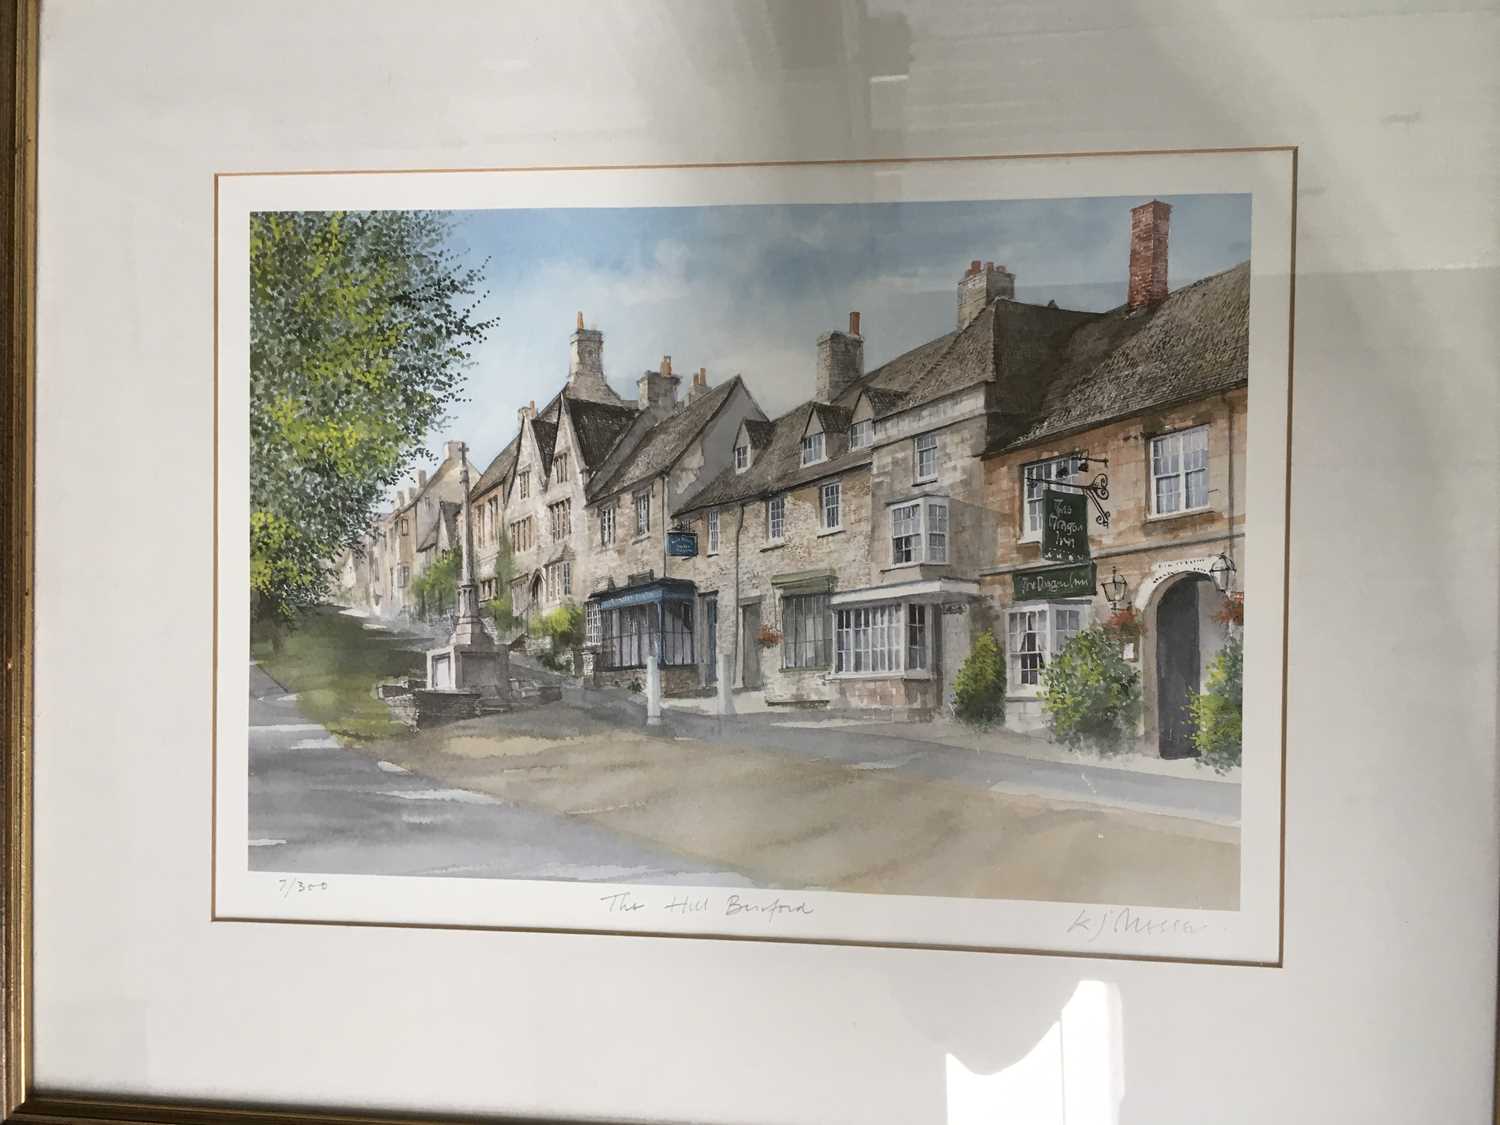 E J Messer, a pair of Limited Edition prints, The Hill Burford, and High Street, both from - Image 3 of 3